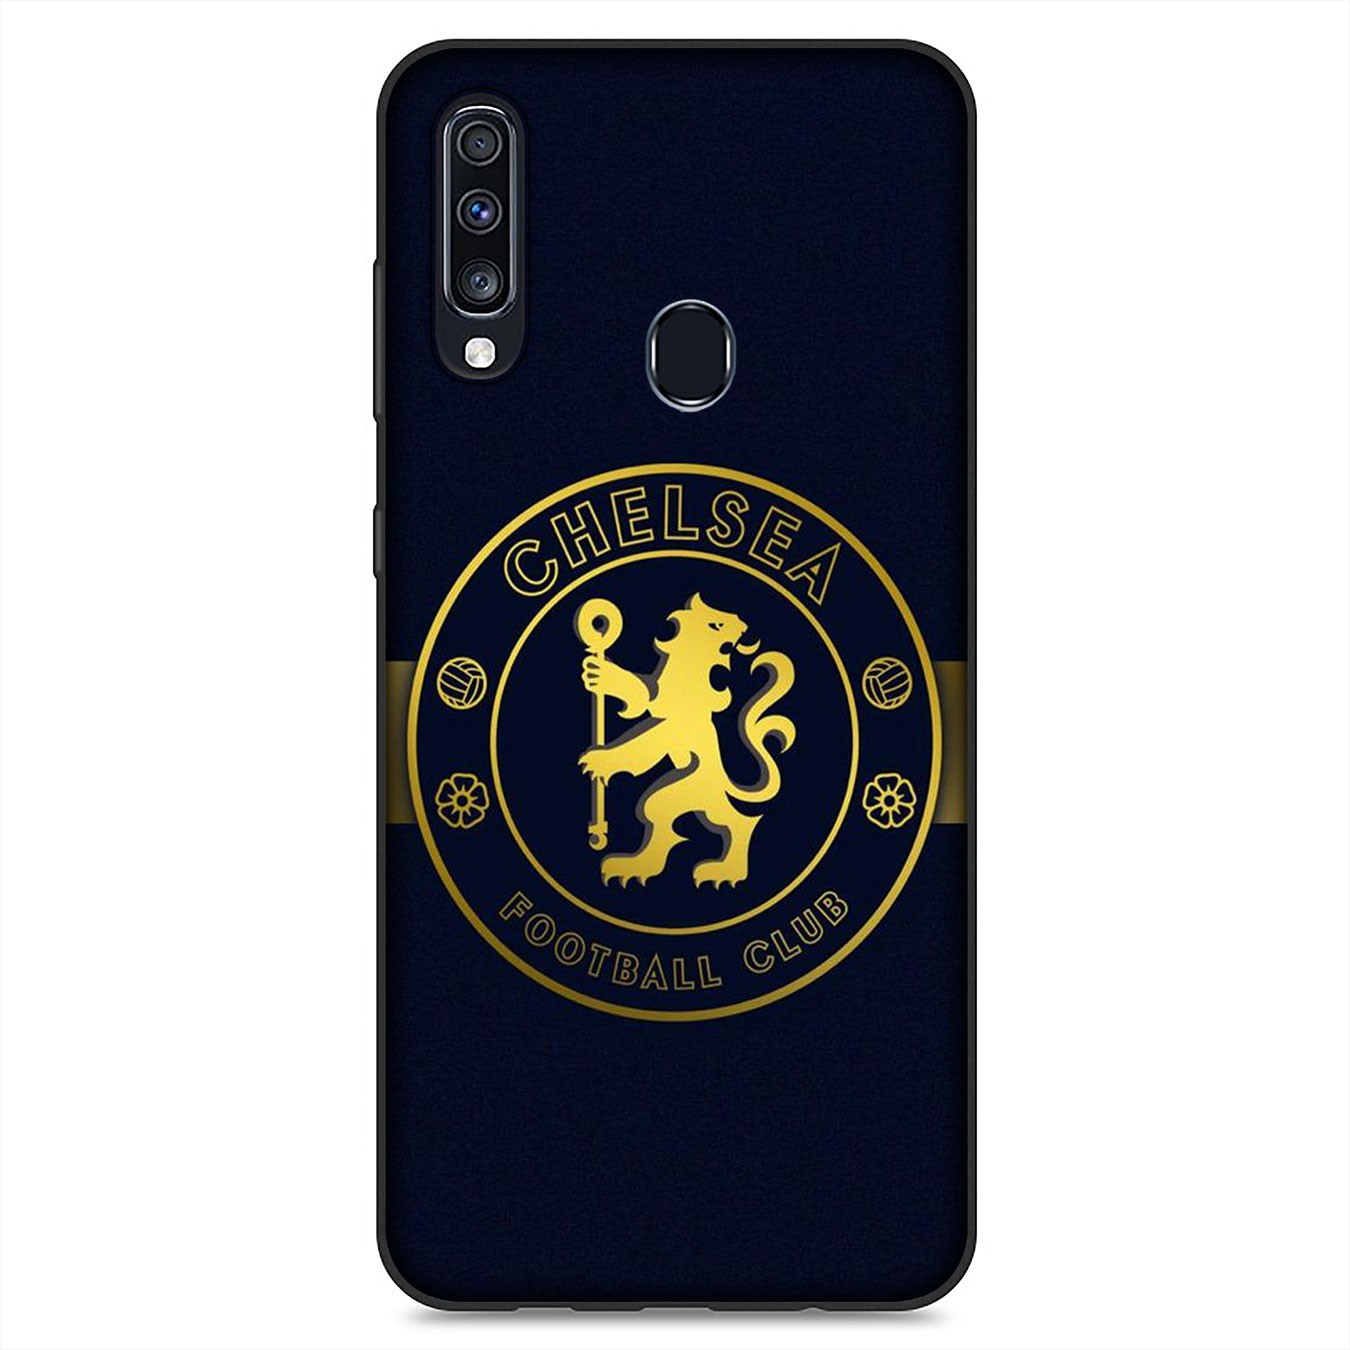 Samsung Galaxy S21 Ultra S8 Plus F62 M62 A2 A32 A52 A72 S21+ S8+ S21Plus Casing Soft Silicone Phone Case Chelsea FC Chelsea Football Cover